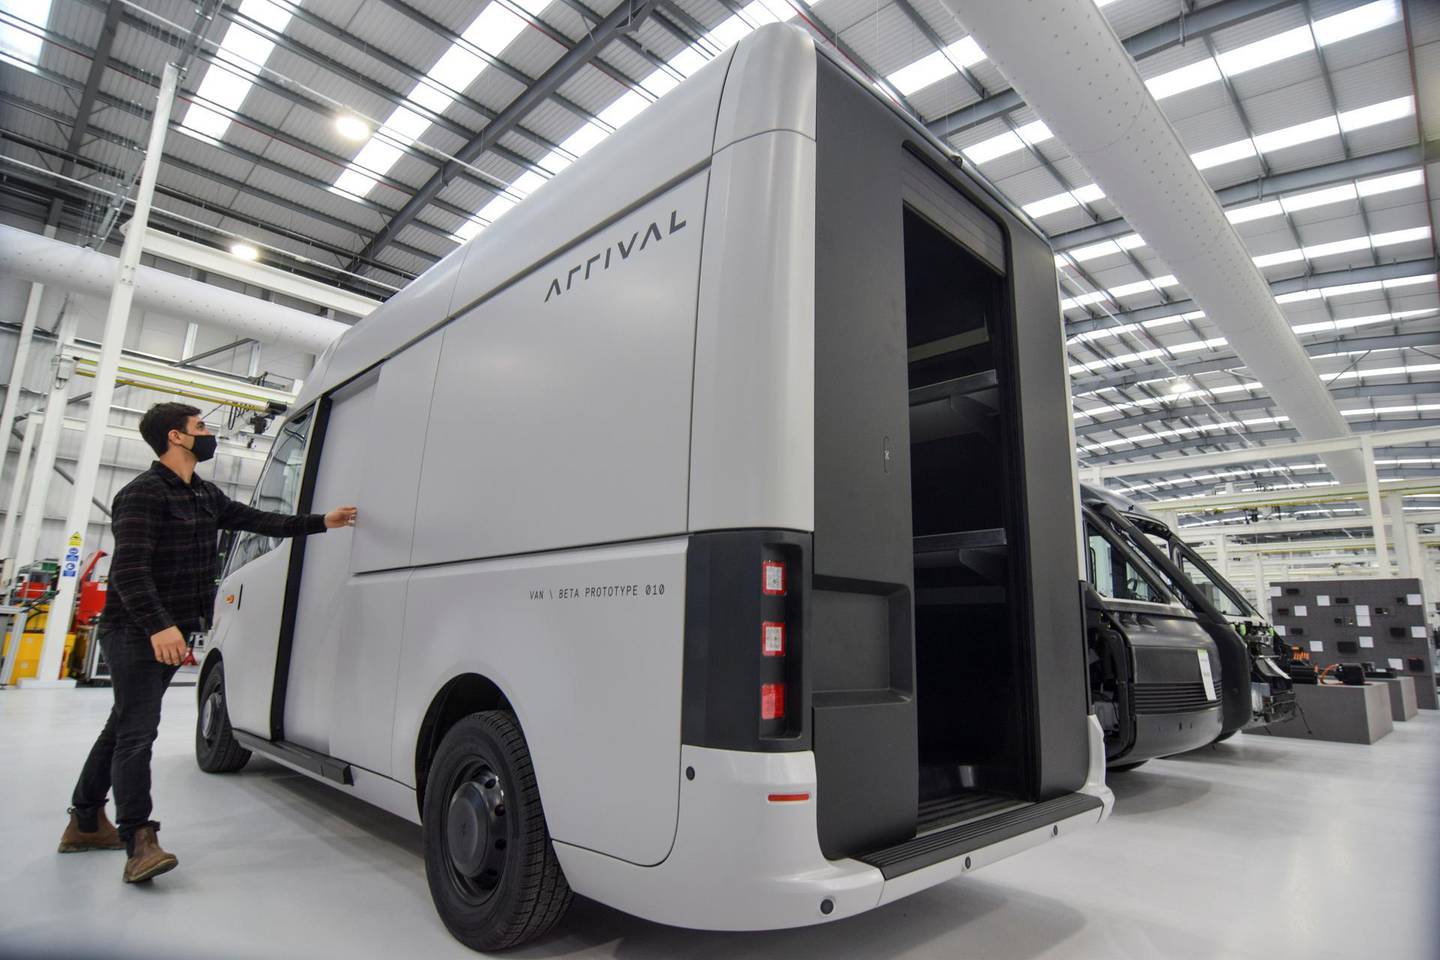 A man looks at a fully-electric test van, due to go into production in 2022, built by electric van and bus maker Arrival Ltd, that has seen a spike in interest due to soaring e-commerce amid the coronavirus disease (COVID-19) pandemic and looming fossil-fuel vehicle bans, in Banbury, Britain, February 23, 2021. Picture taken February 23, 2021. REUTERS/Nick Carey